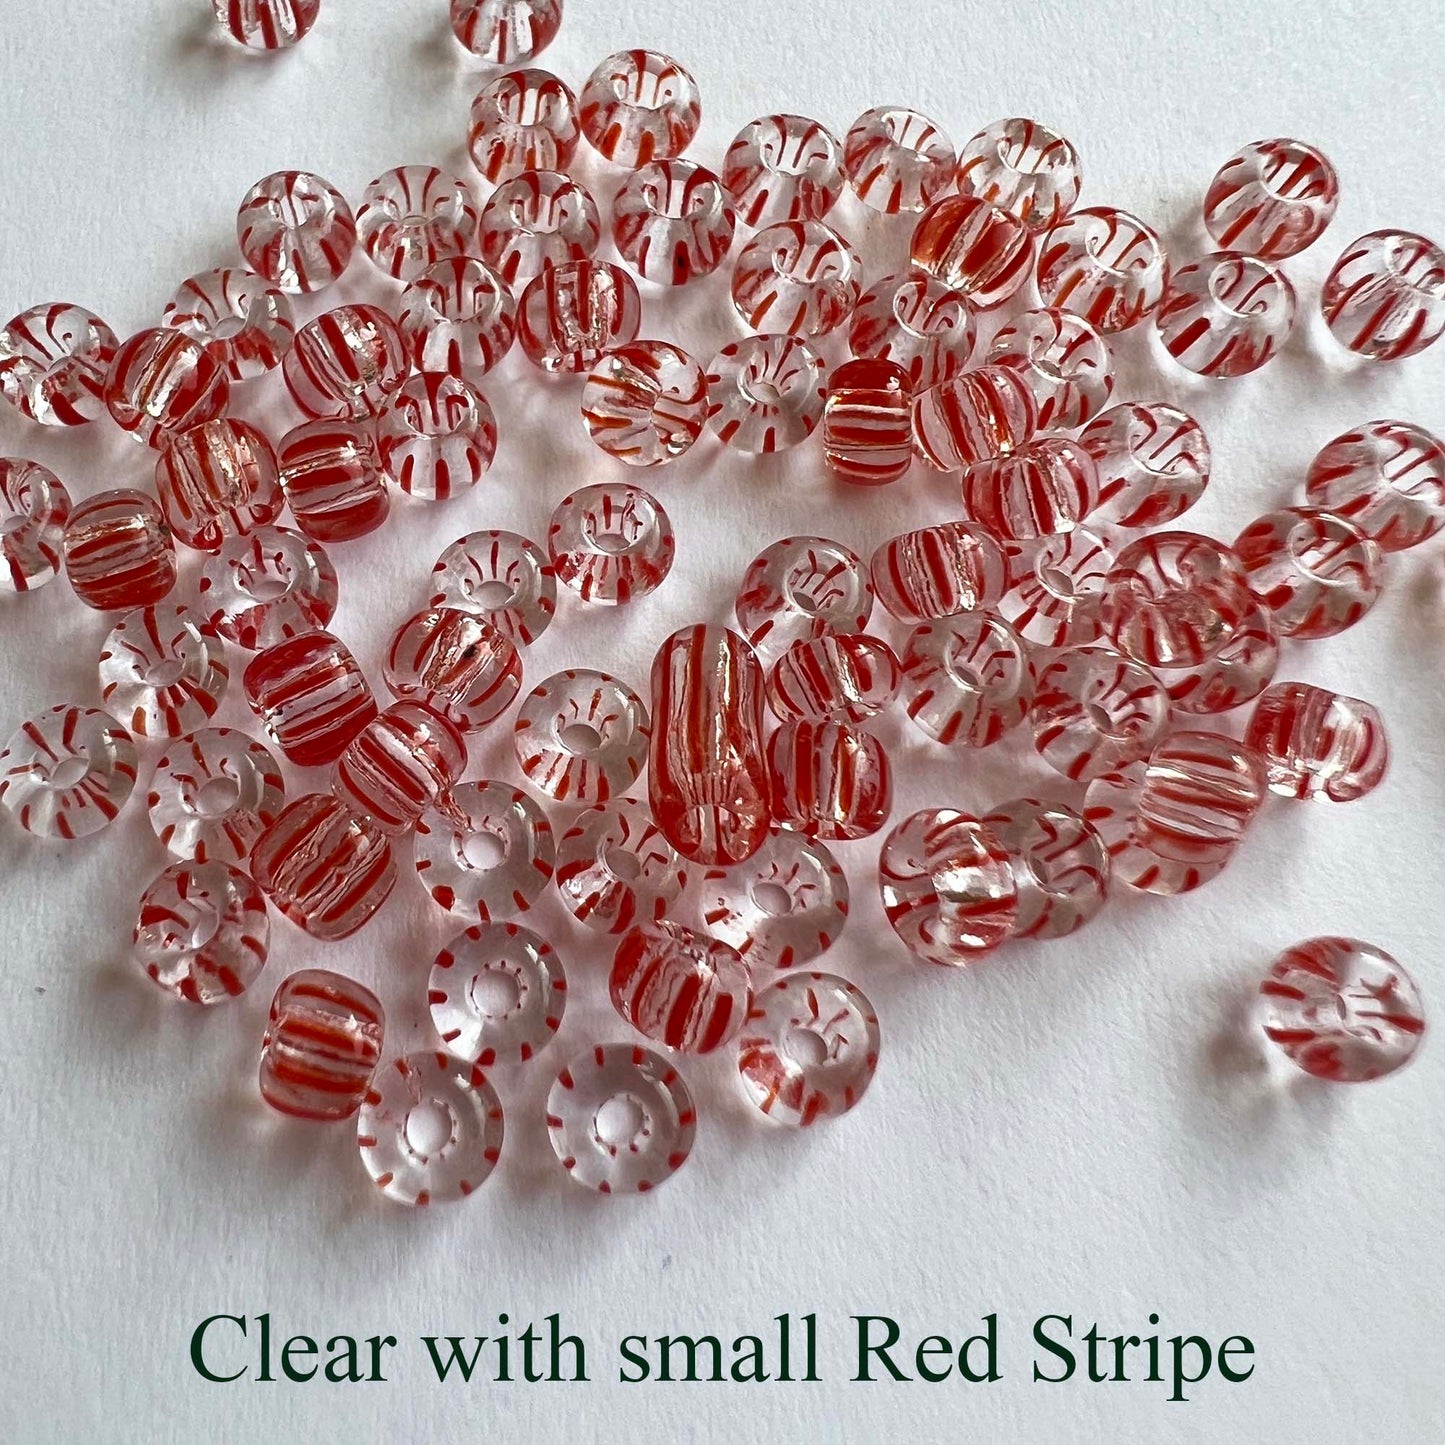 Striped Seed Beads 6/0 Small Stripe 20g Bag choose color